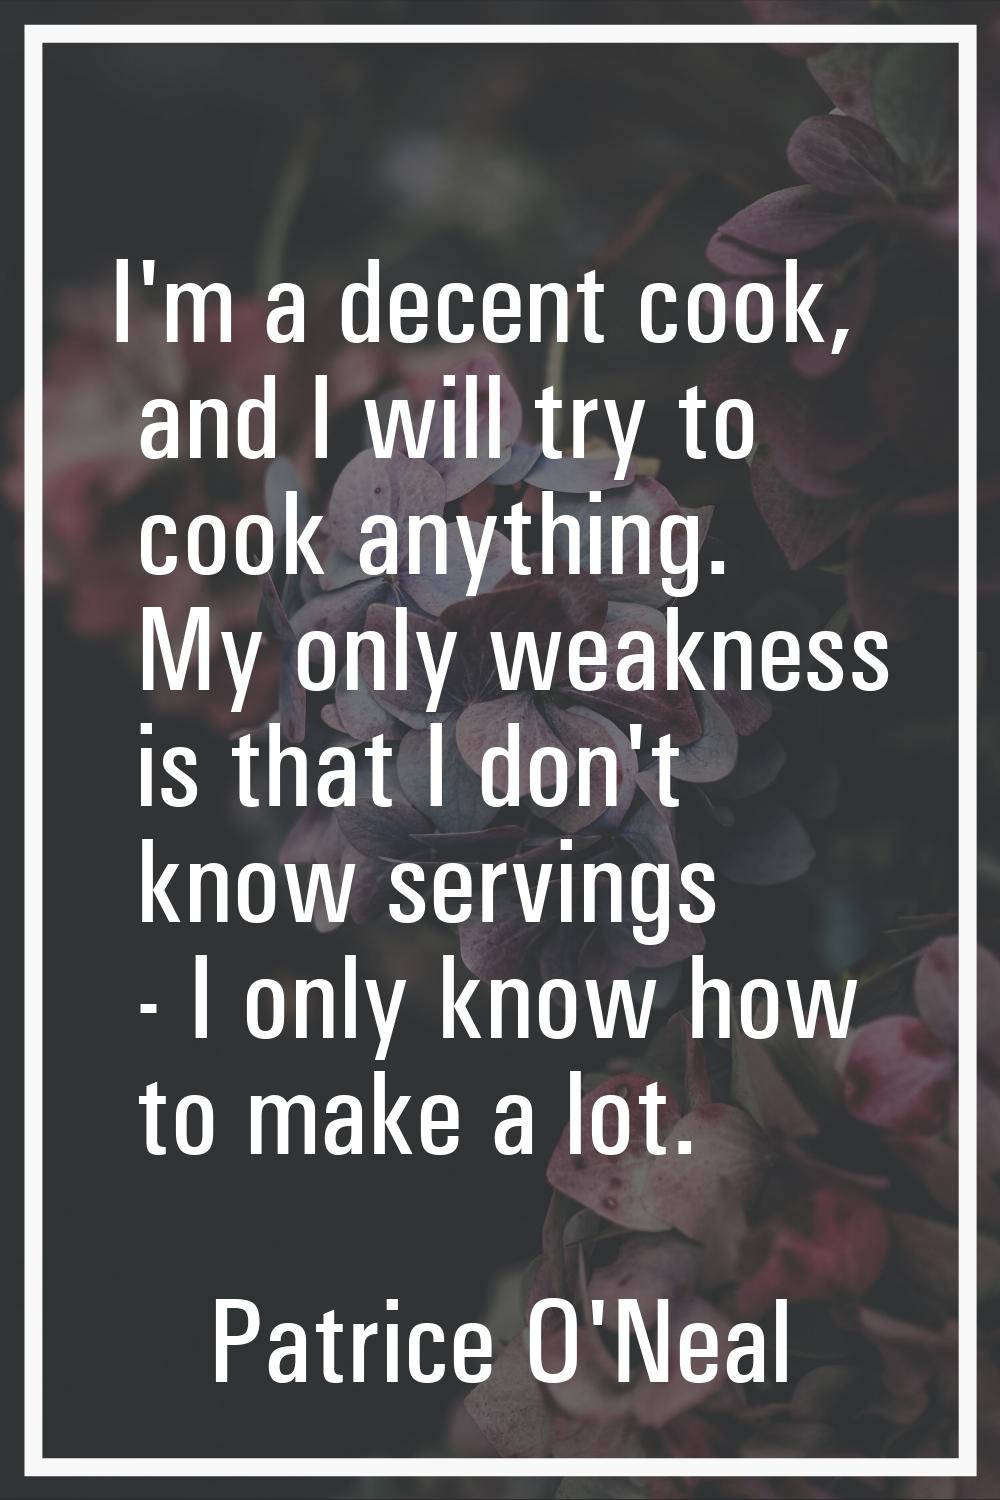 I'm a decent cook, and I will try to cook anything. My only weakness is that I don't know servings 